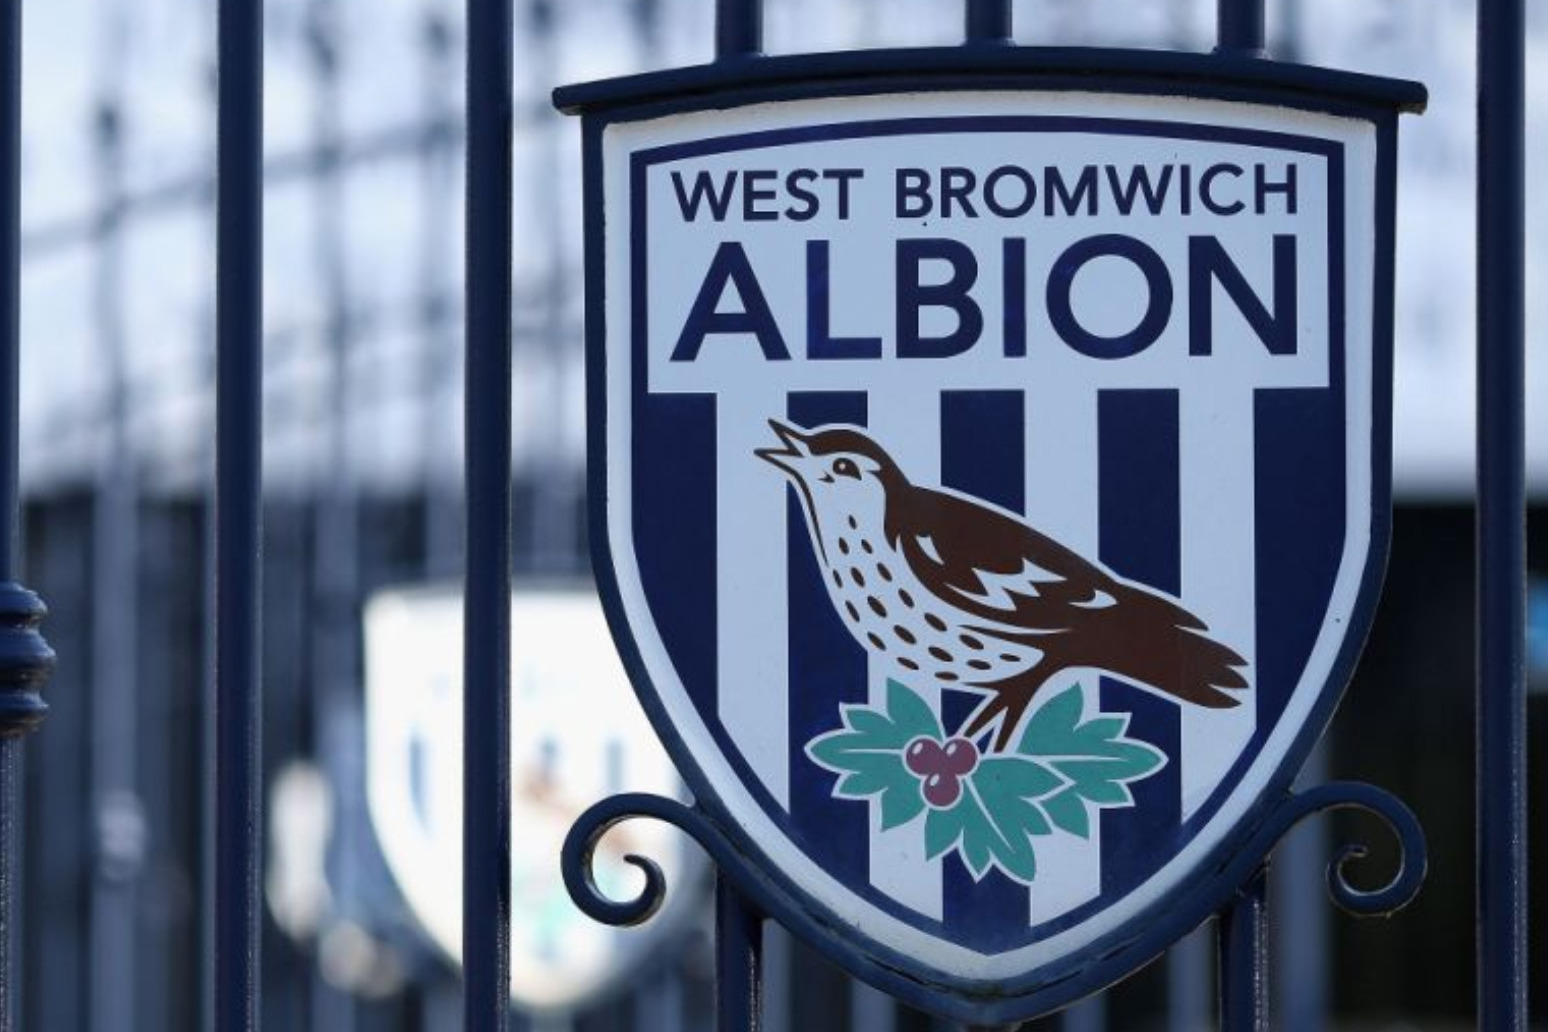 Alan Pardew leaves rock-bottom West Brom by mutual consent 